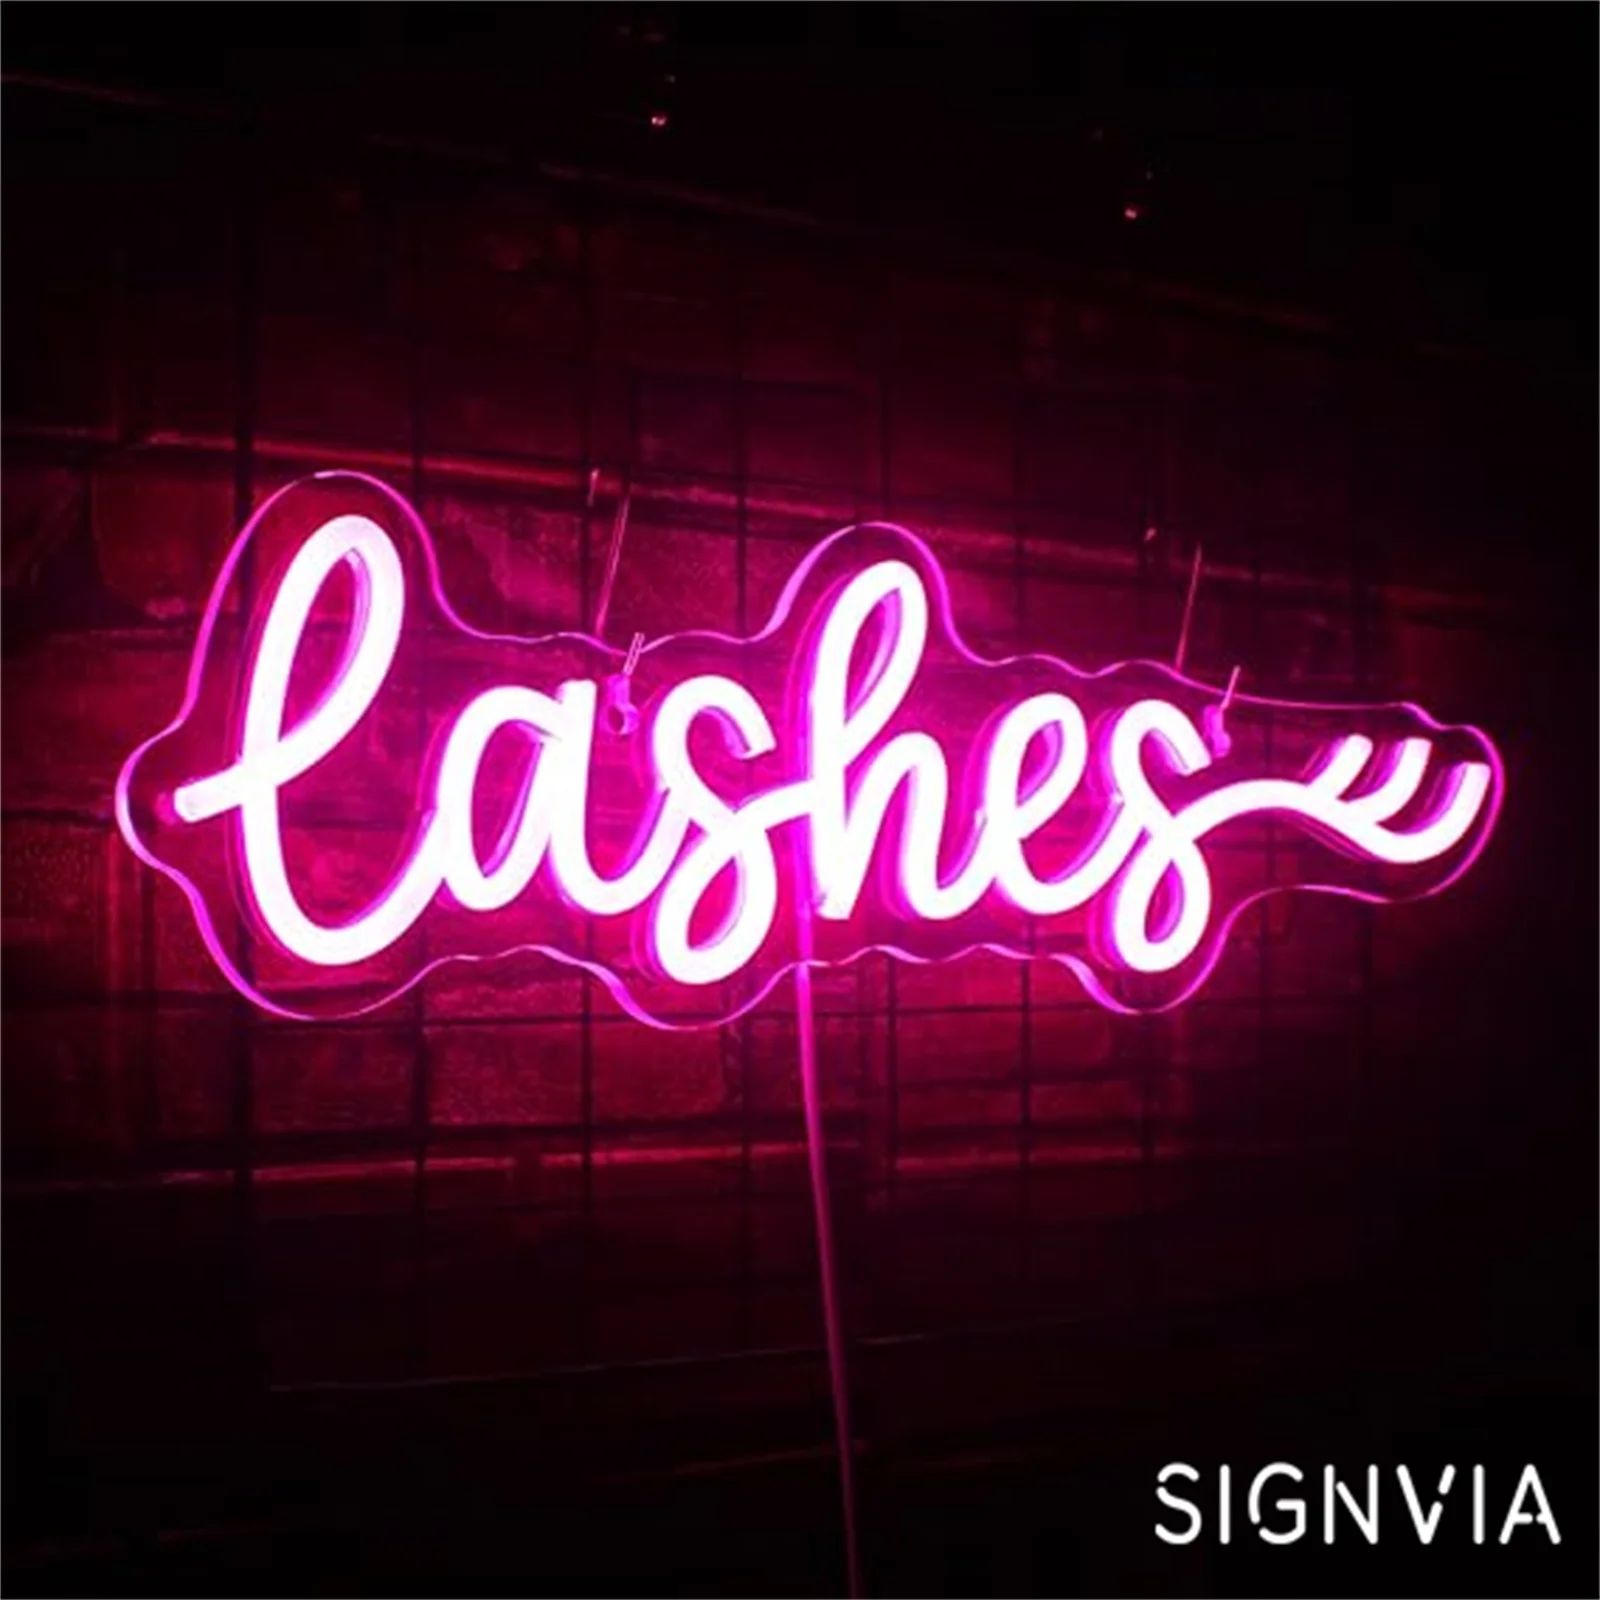 neon-hope-sign-light-up-for-wall-decor-usb-neon-signs-for-lashes-salon-beauty-room-art-decoration-nail-shop